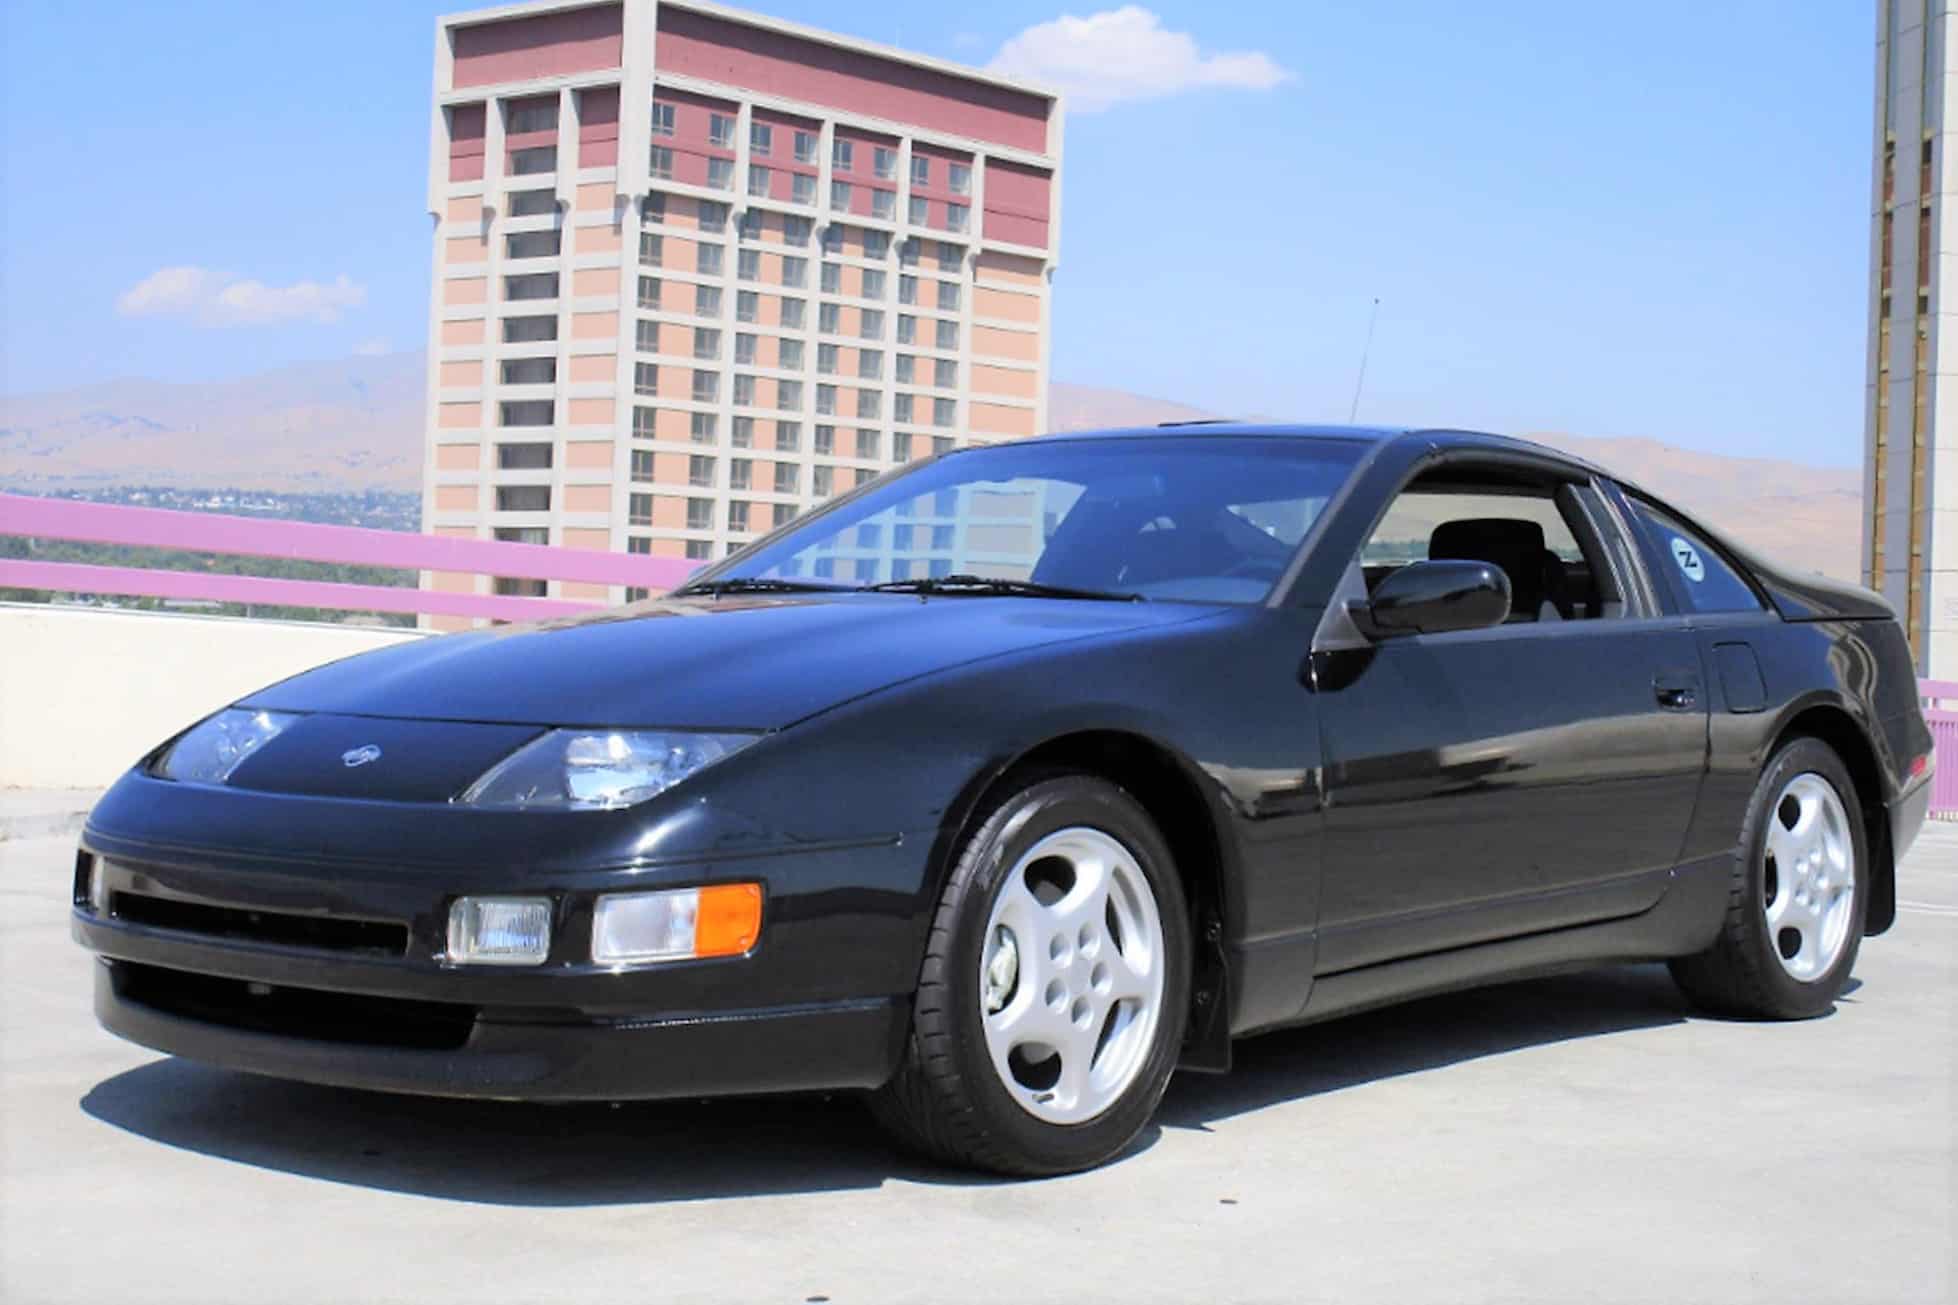 Pick of the Day: 1996 Nissan 300ZX that commemorates the original 